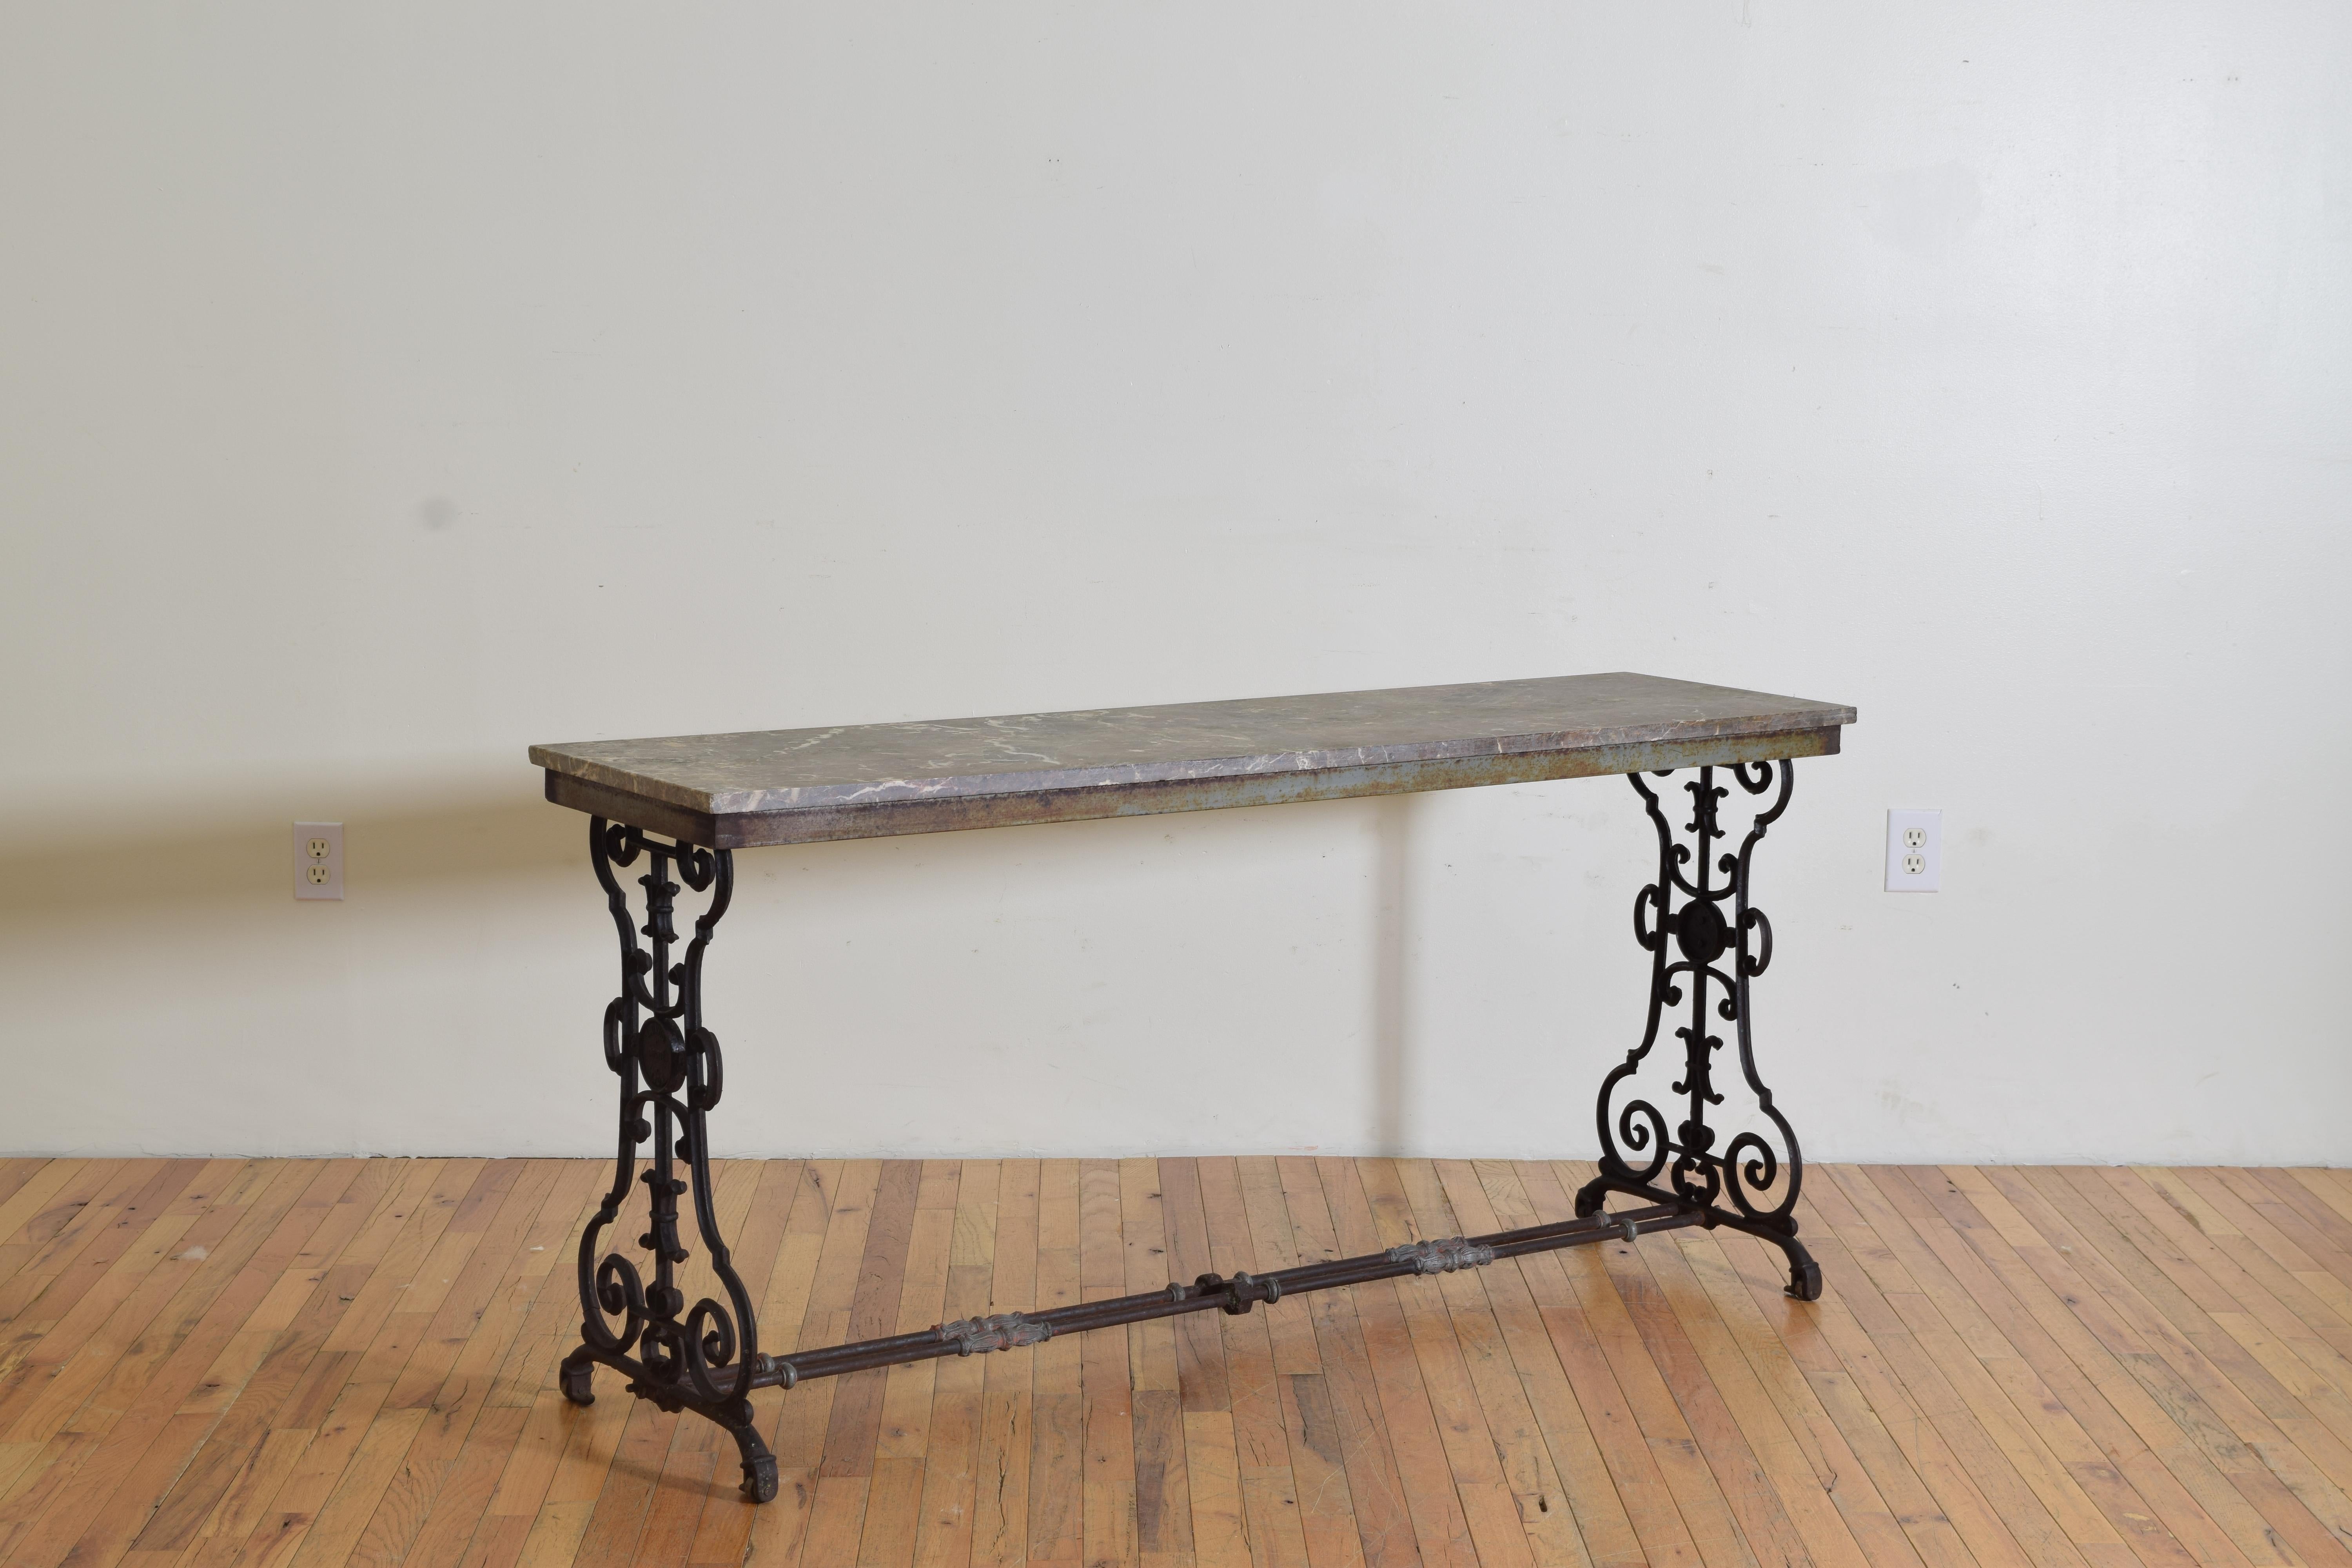 Having, seemingly, its original marble top this table is constructed by hand in wrought iron integrating a series of c-scrolls in and around two urn-form supports joined by two rods as stretchers